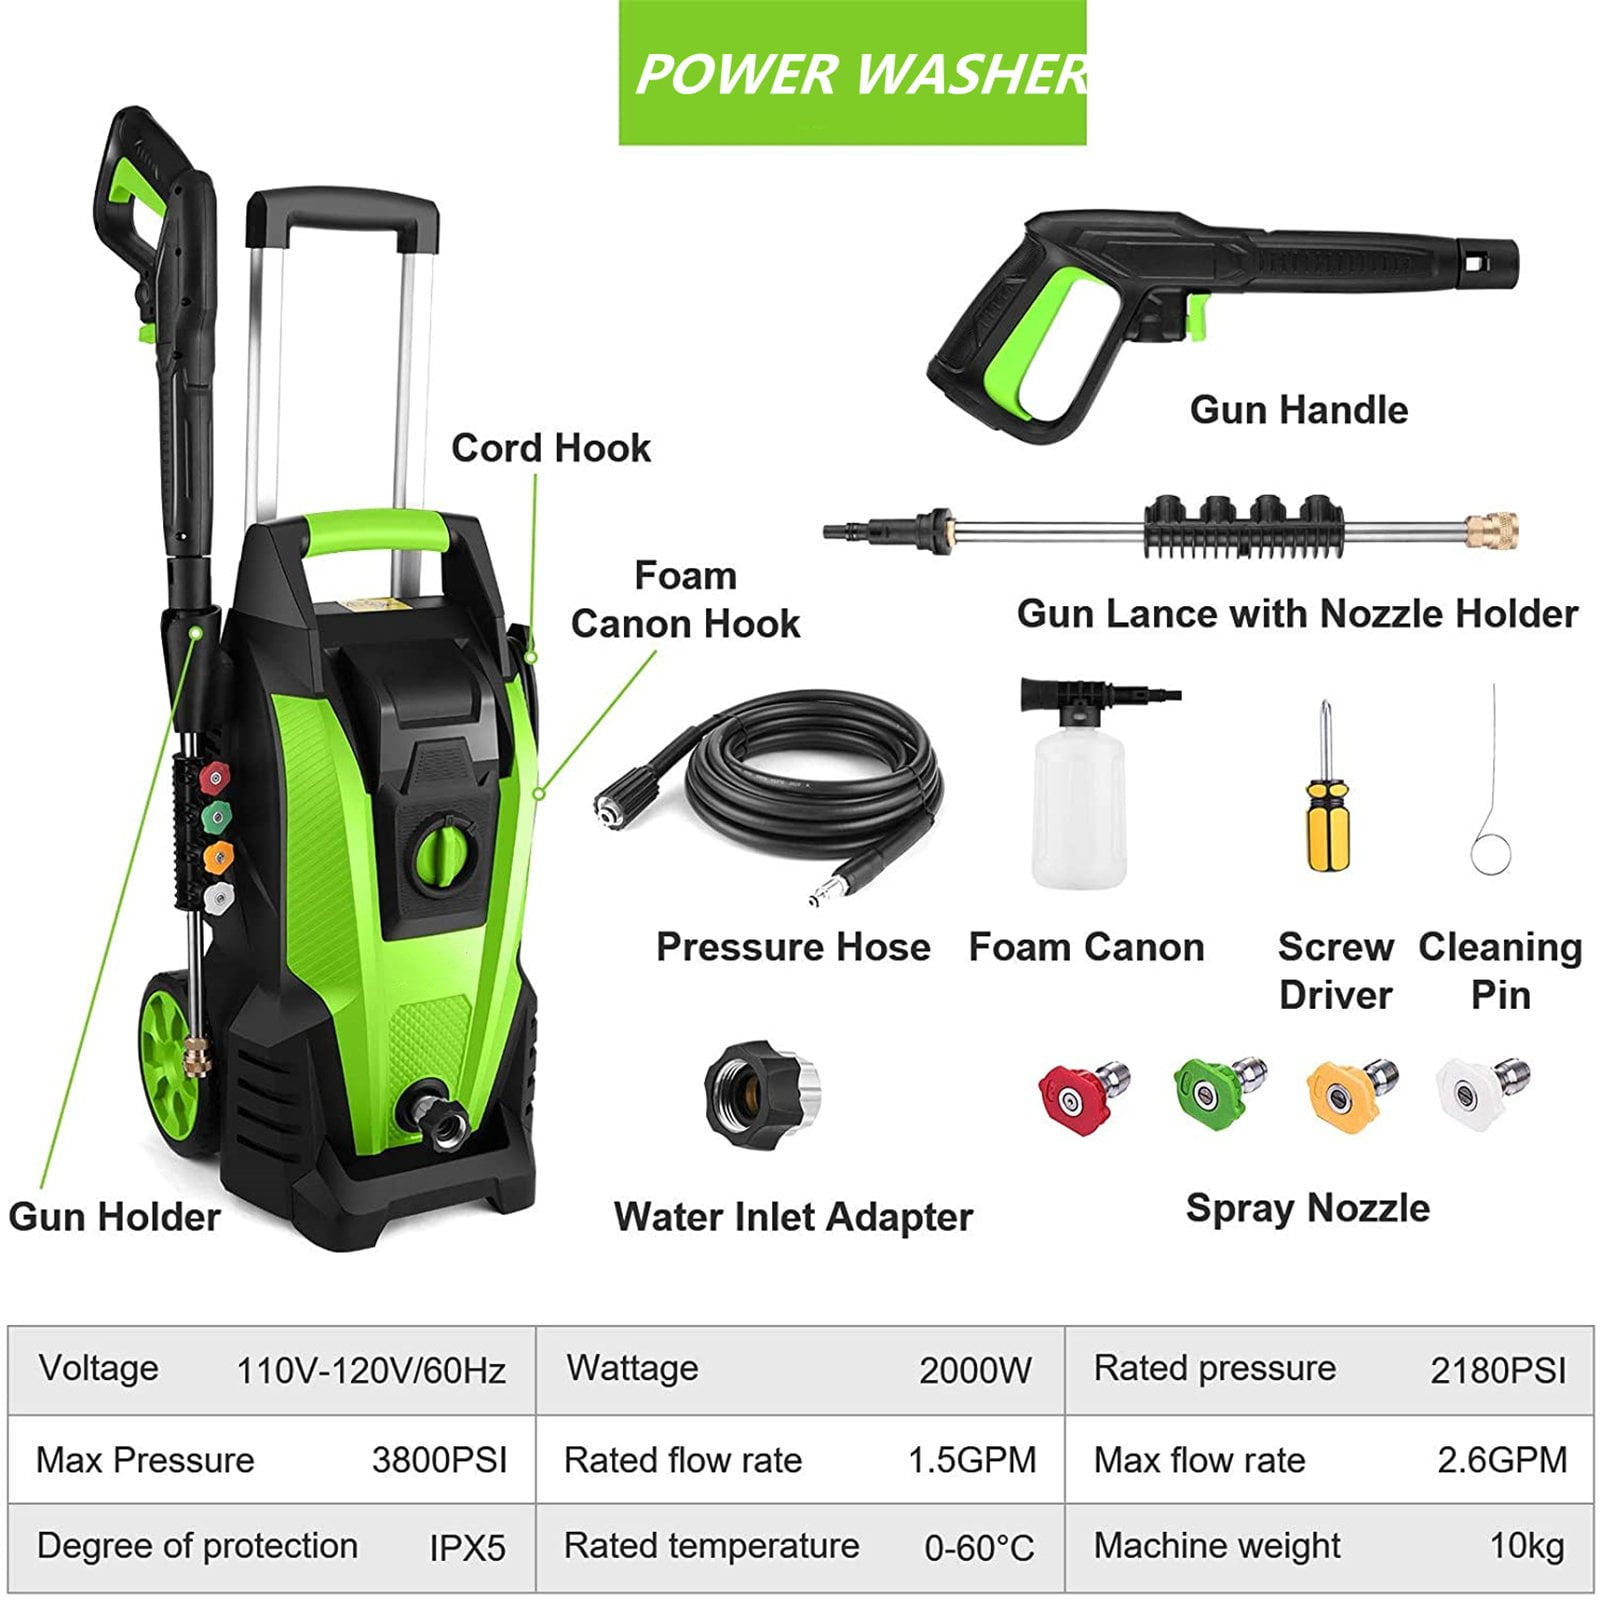 2.6 GPM 1800W Best for Cleaning Homes TEANDE Electric Pressure Washer 3500 PSI High Pressure Power Washer Machine with 4 Nozzles Patios Driveways Blue Decks Cars Soap Bottle and Hose Reel 